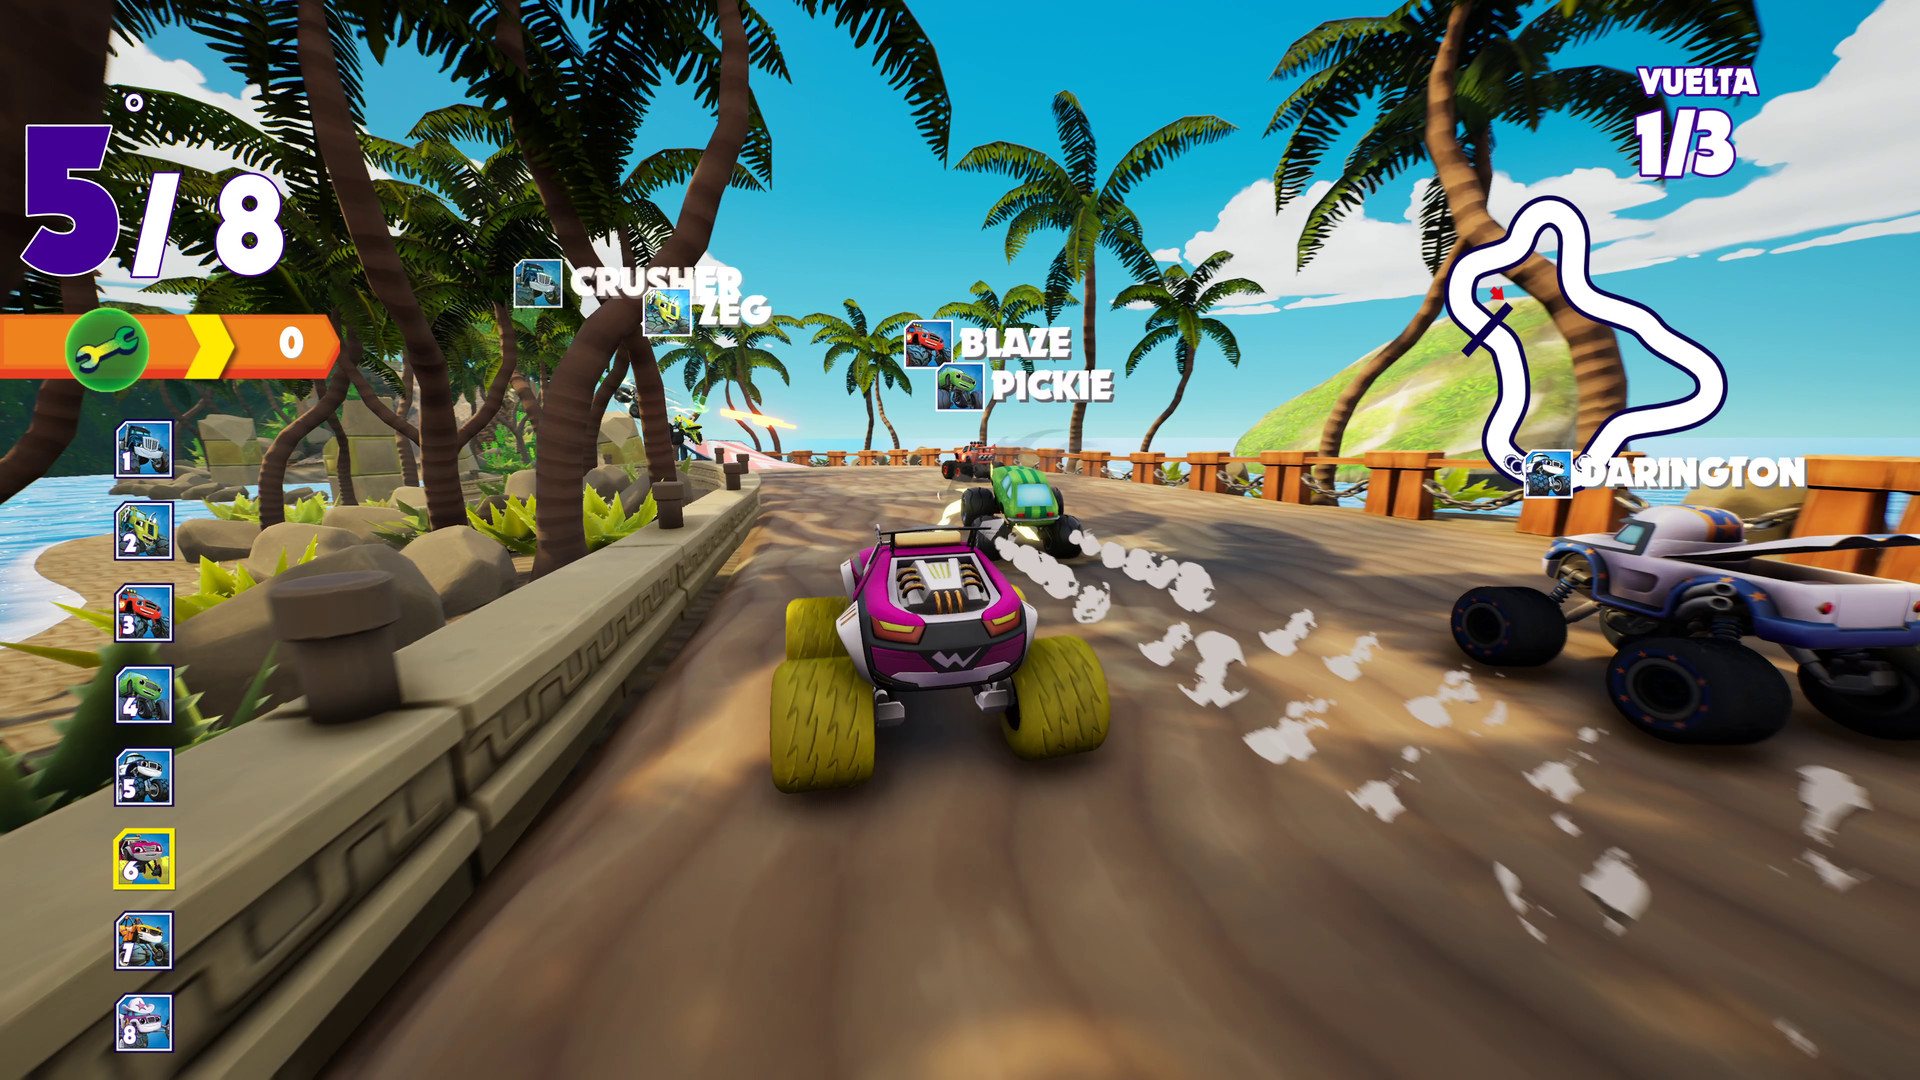 Jogo Blaze and the Monster Machines: Axle City Racers - PS4 no